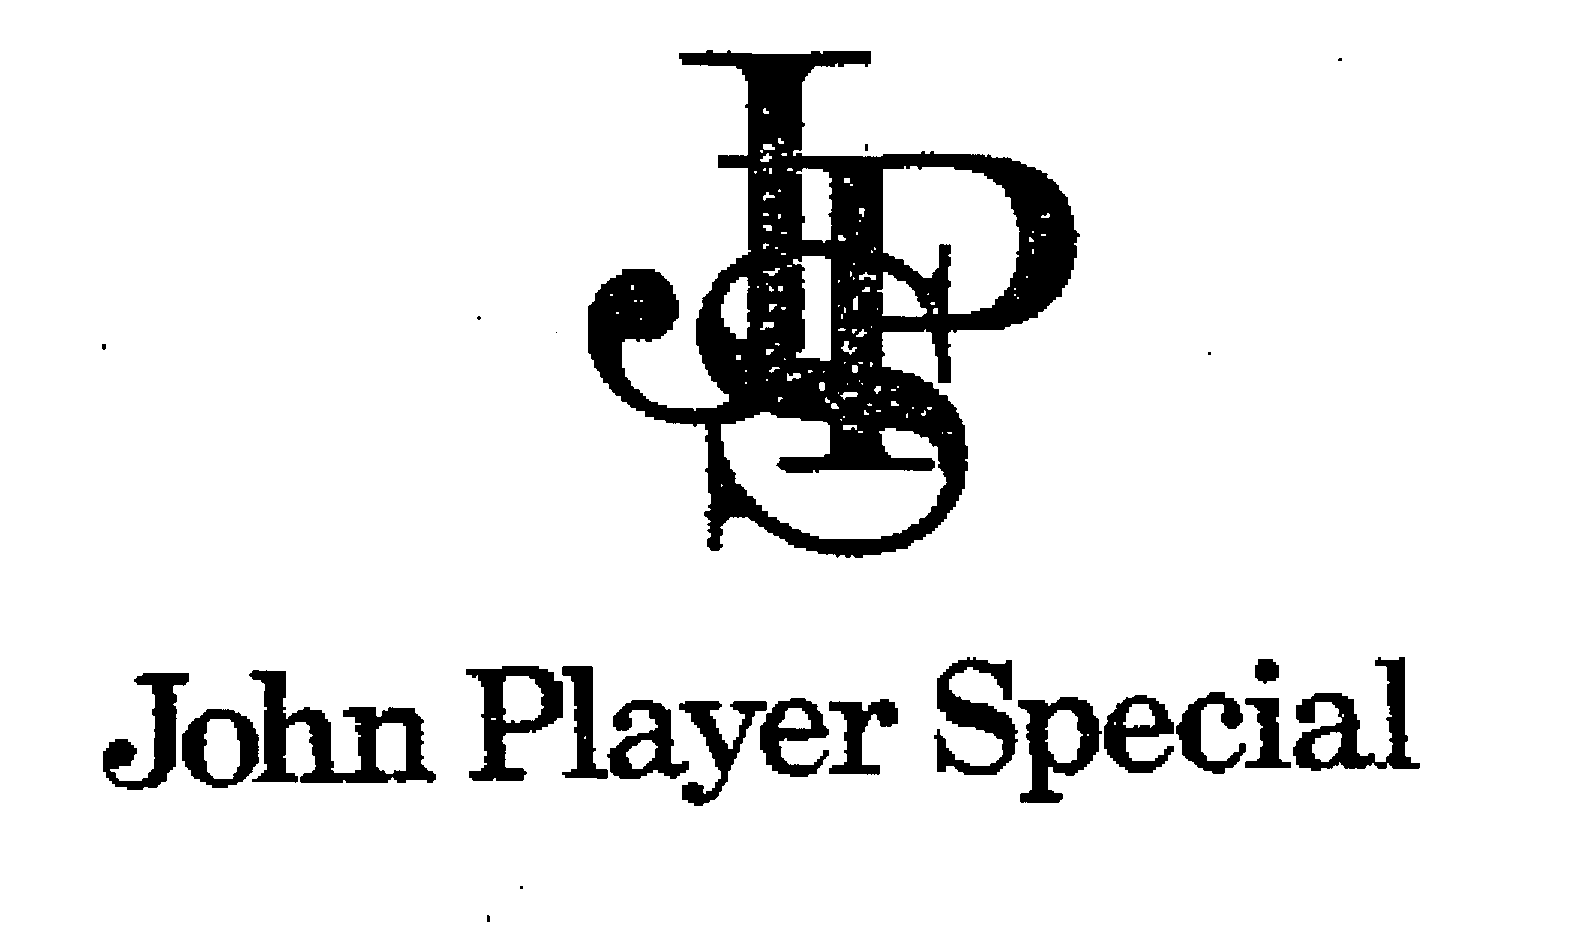 JOHN PLAYER SPECIAL